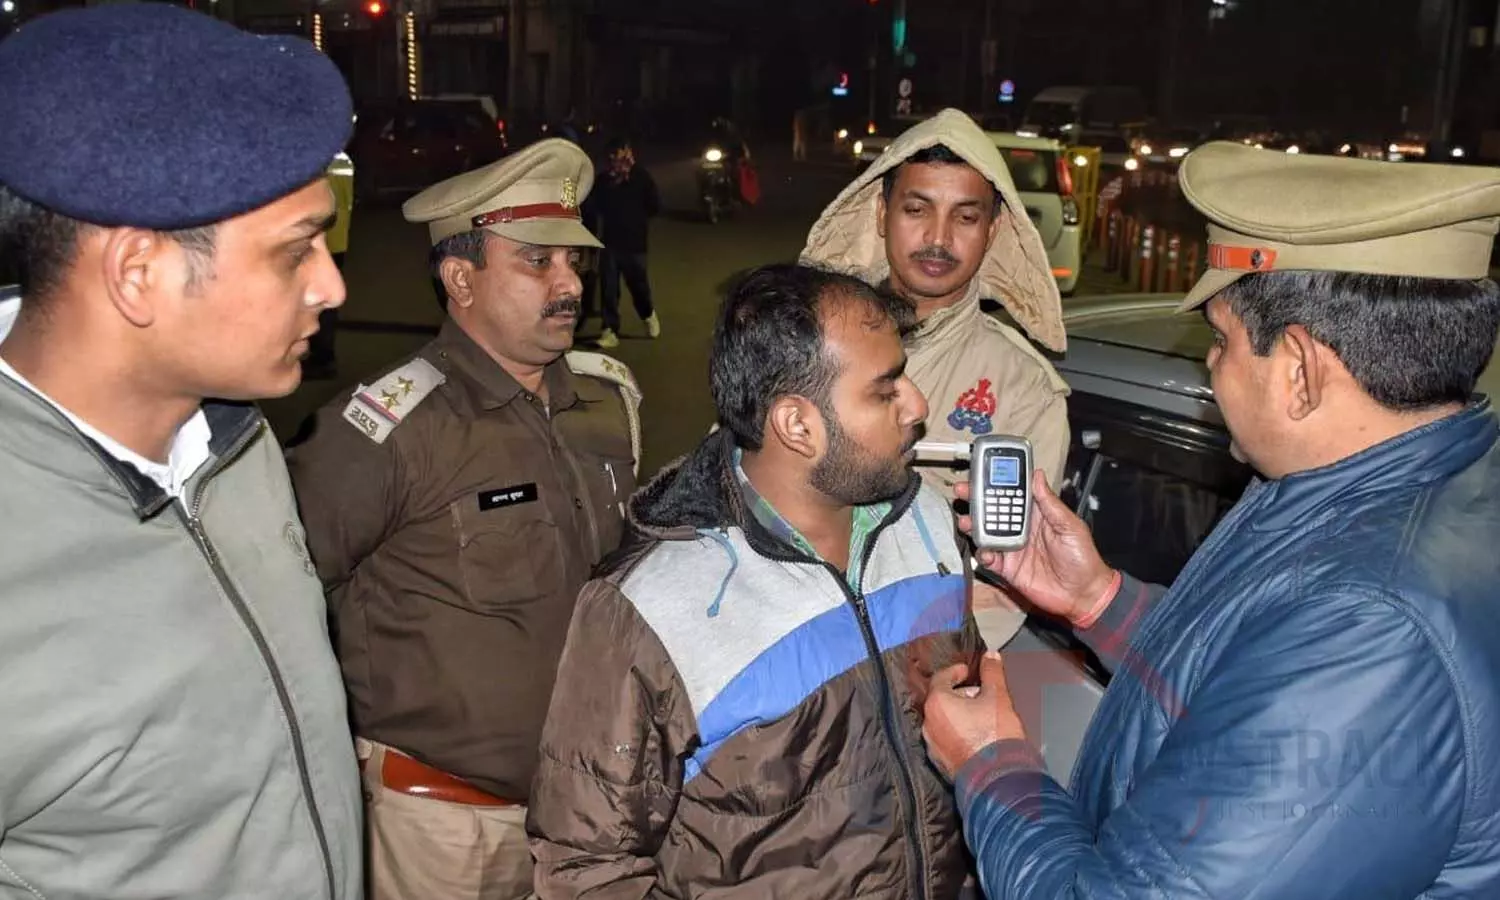 Night Curfew: Lucknow Police has tightened, if you meet after 11 oclock it is not good!